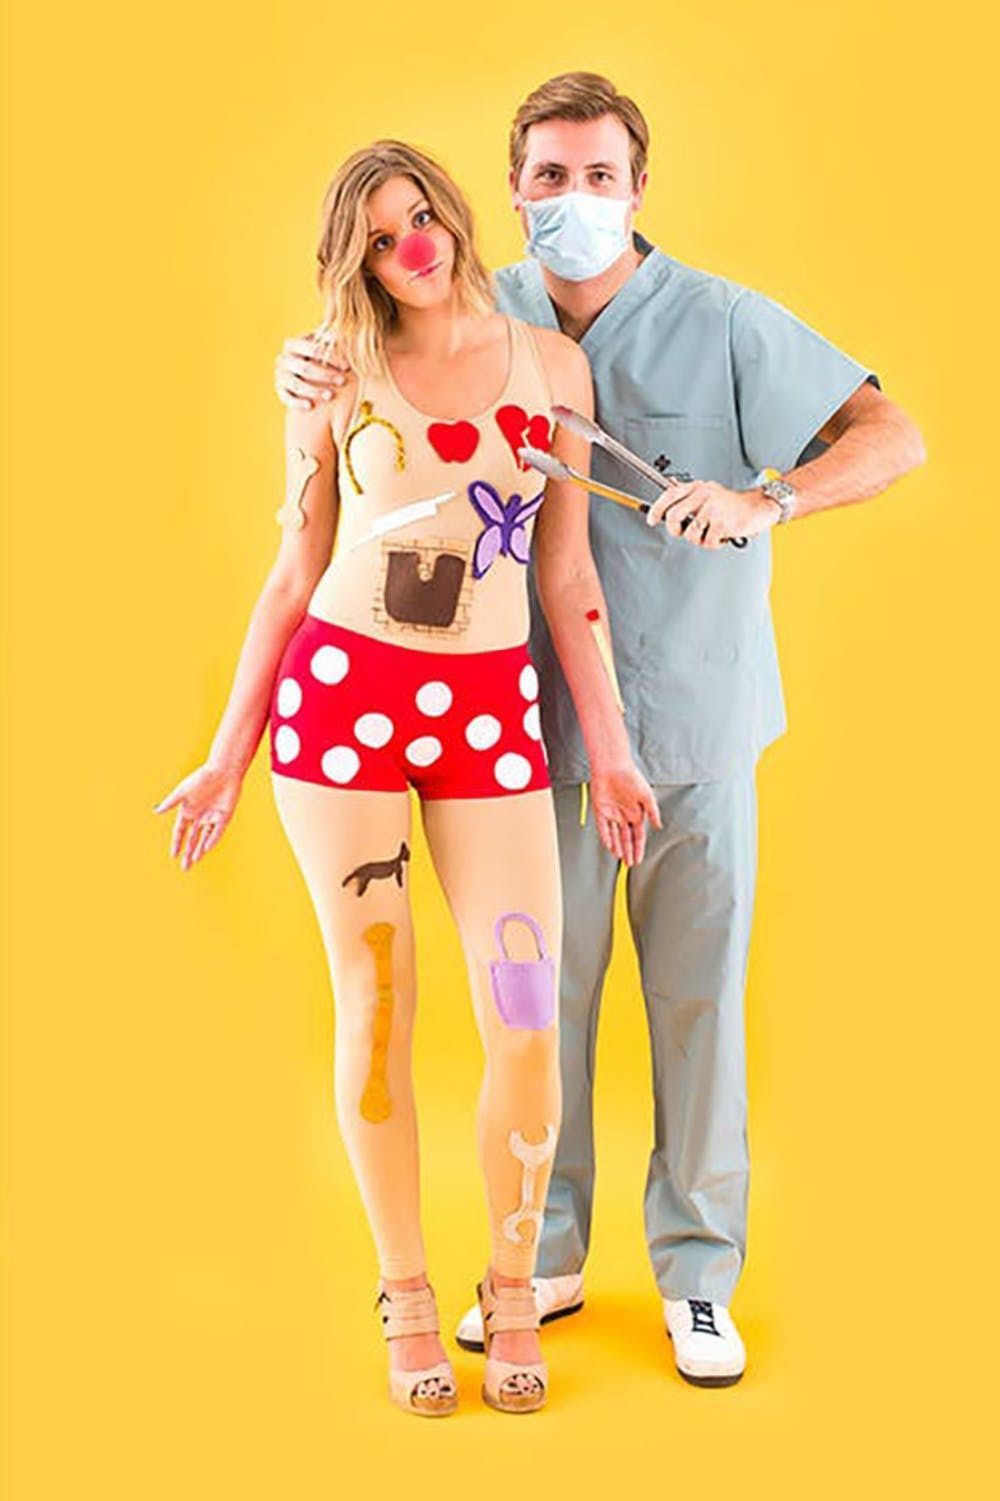 33 Funny Sexy Halloween Costume Ideas That Prove Funny Is the New Sexy image photo picture